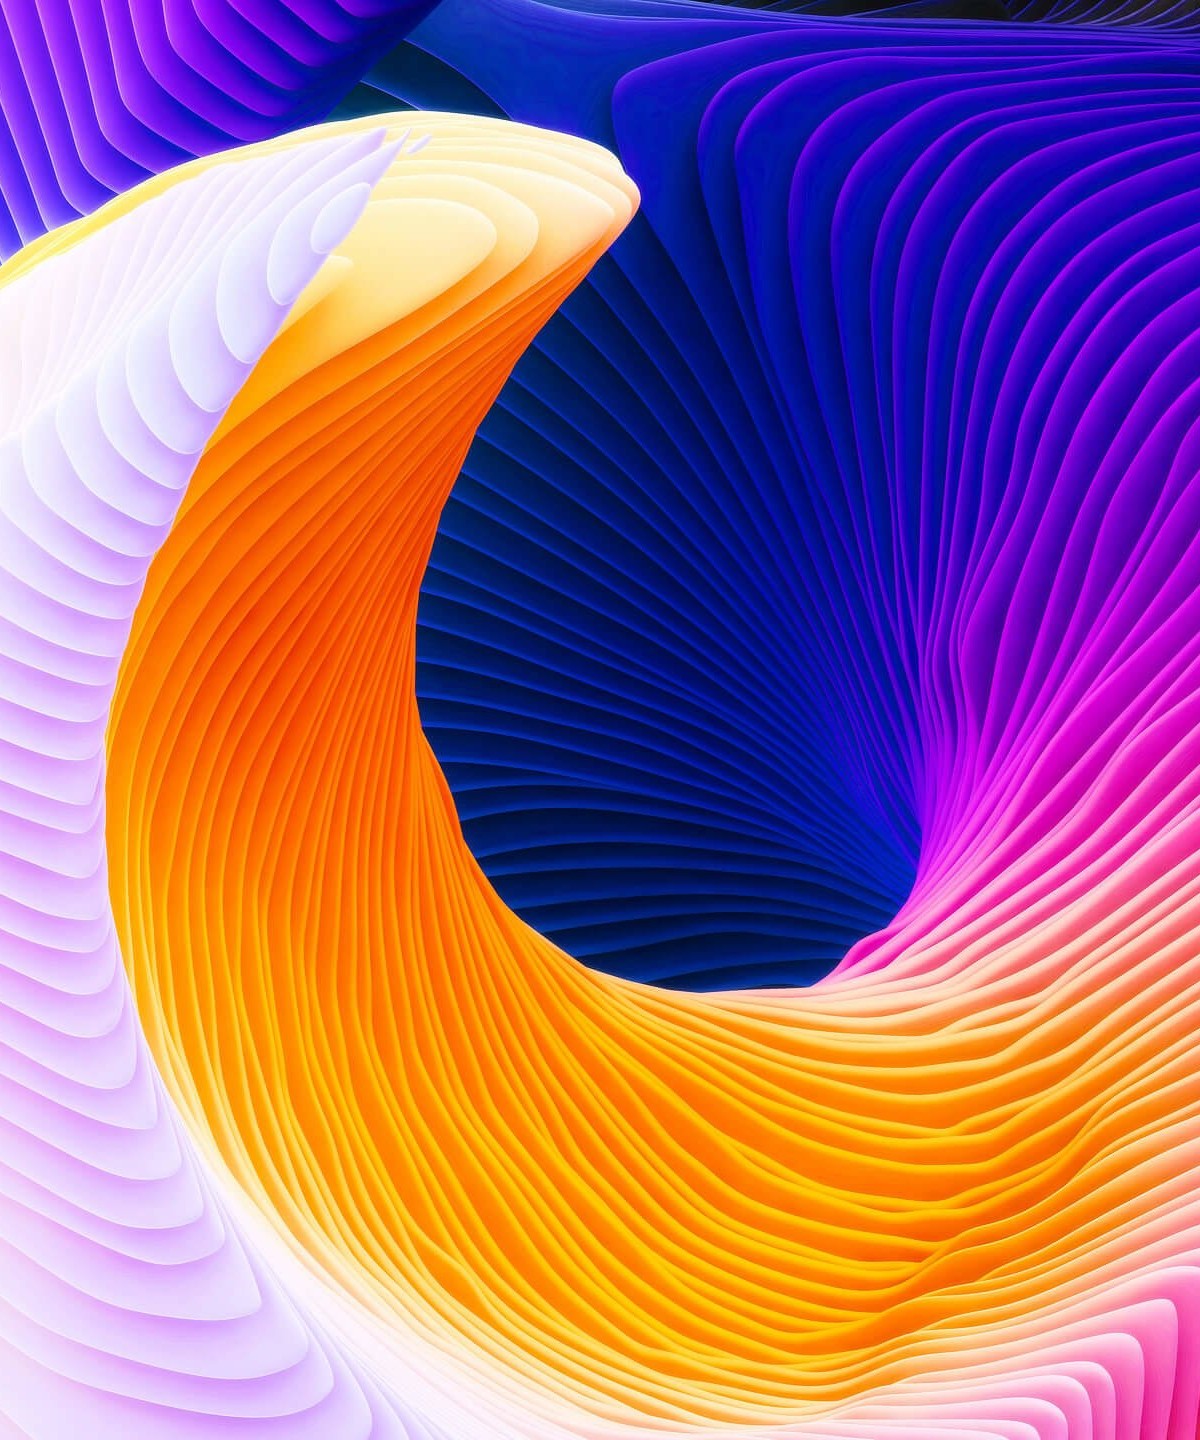 Colorful Spiral Wallpaper for Amazon Kindle Fire HDX